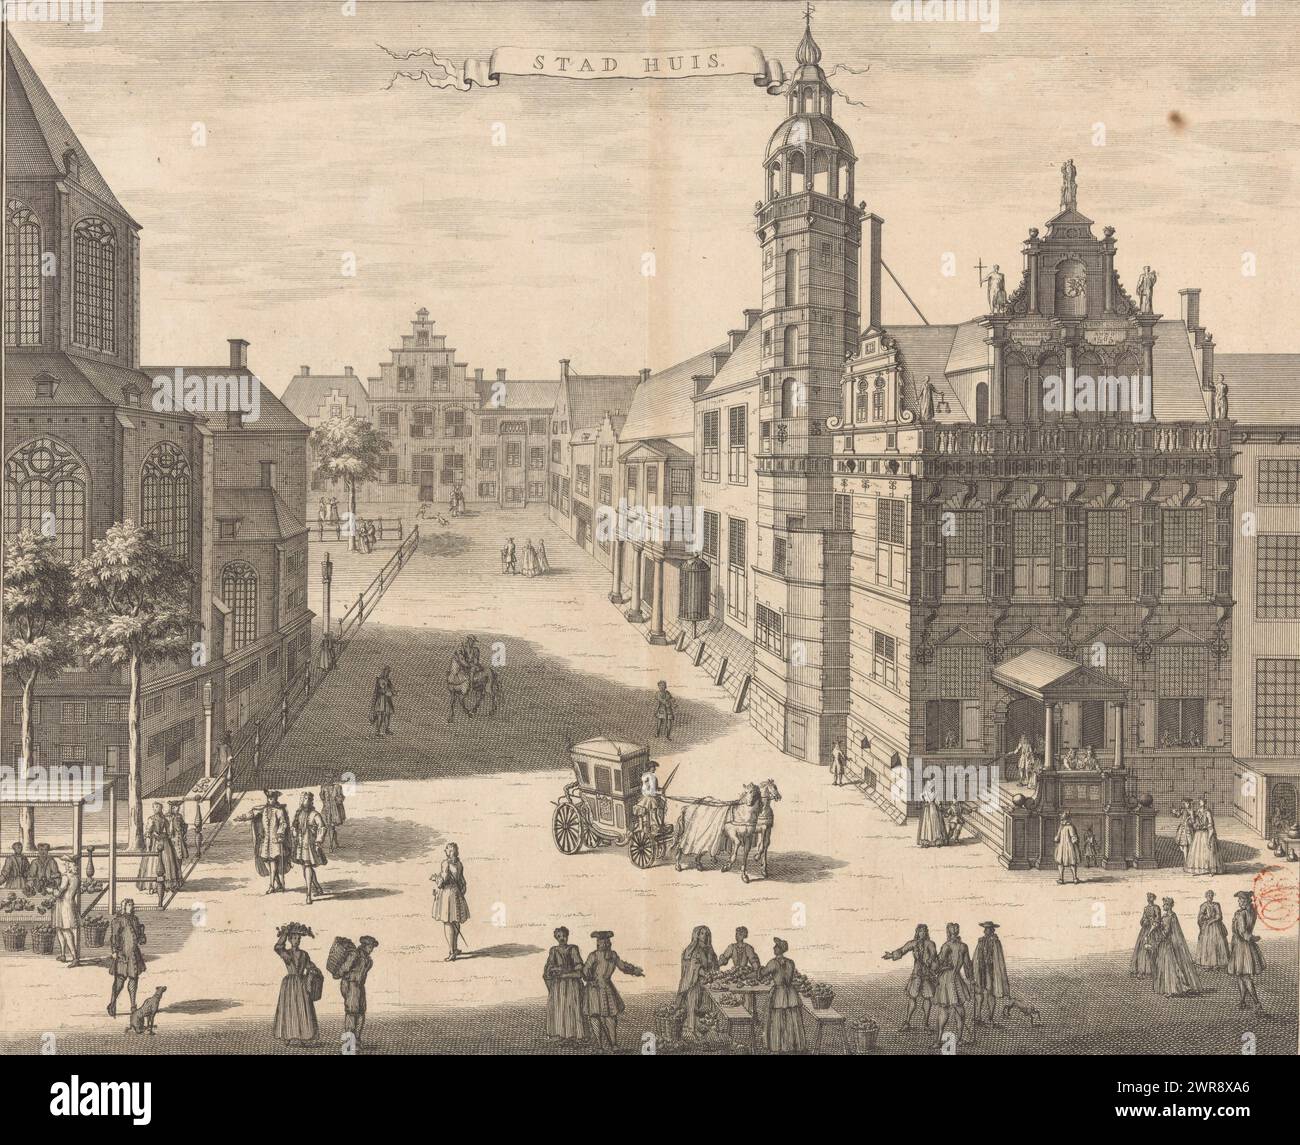 View of the Old Town Hall in The Hague, Town Hall (title on object), View of the Old Town Hall in The Hague (right). On the left part of the Grote Kerk. It shows various figures and a carriage., print maker: anonymous, after drawing by: Gerrit van Giessen, publisher: Reinier Boitet, after drawing by: The Hague, publisher: Delft, publisher: Amsterdam, 1730 - 1736, paper, etching, engraving, height 283 mm × width 346 mm, print Stock Photo